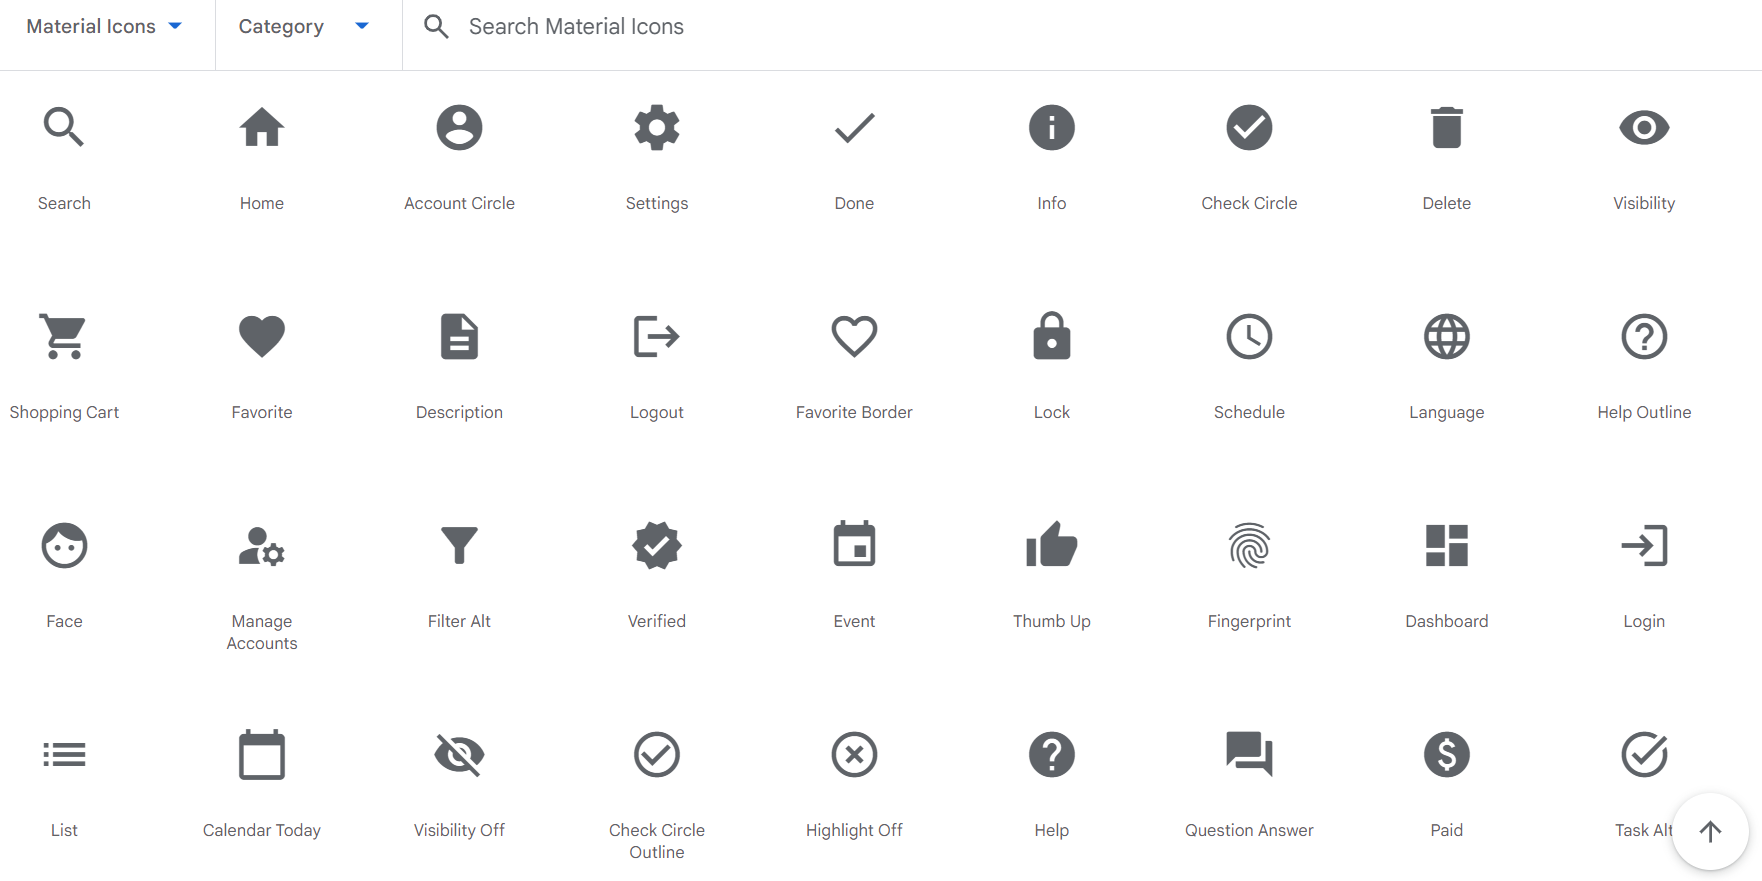 Material icons by Google.